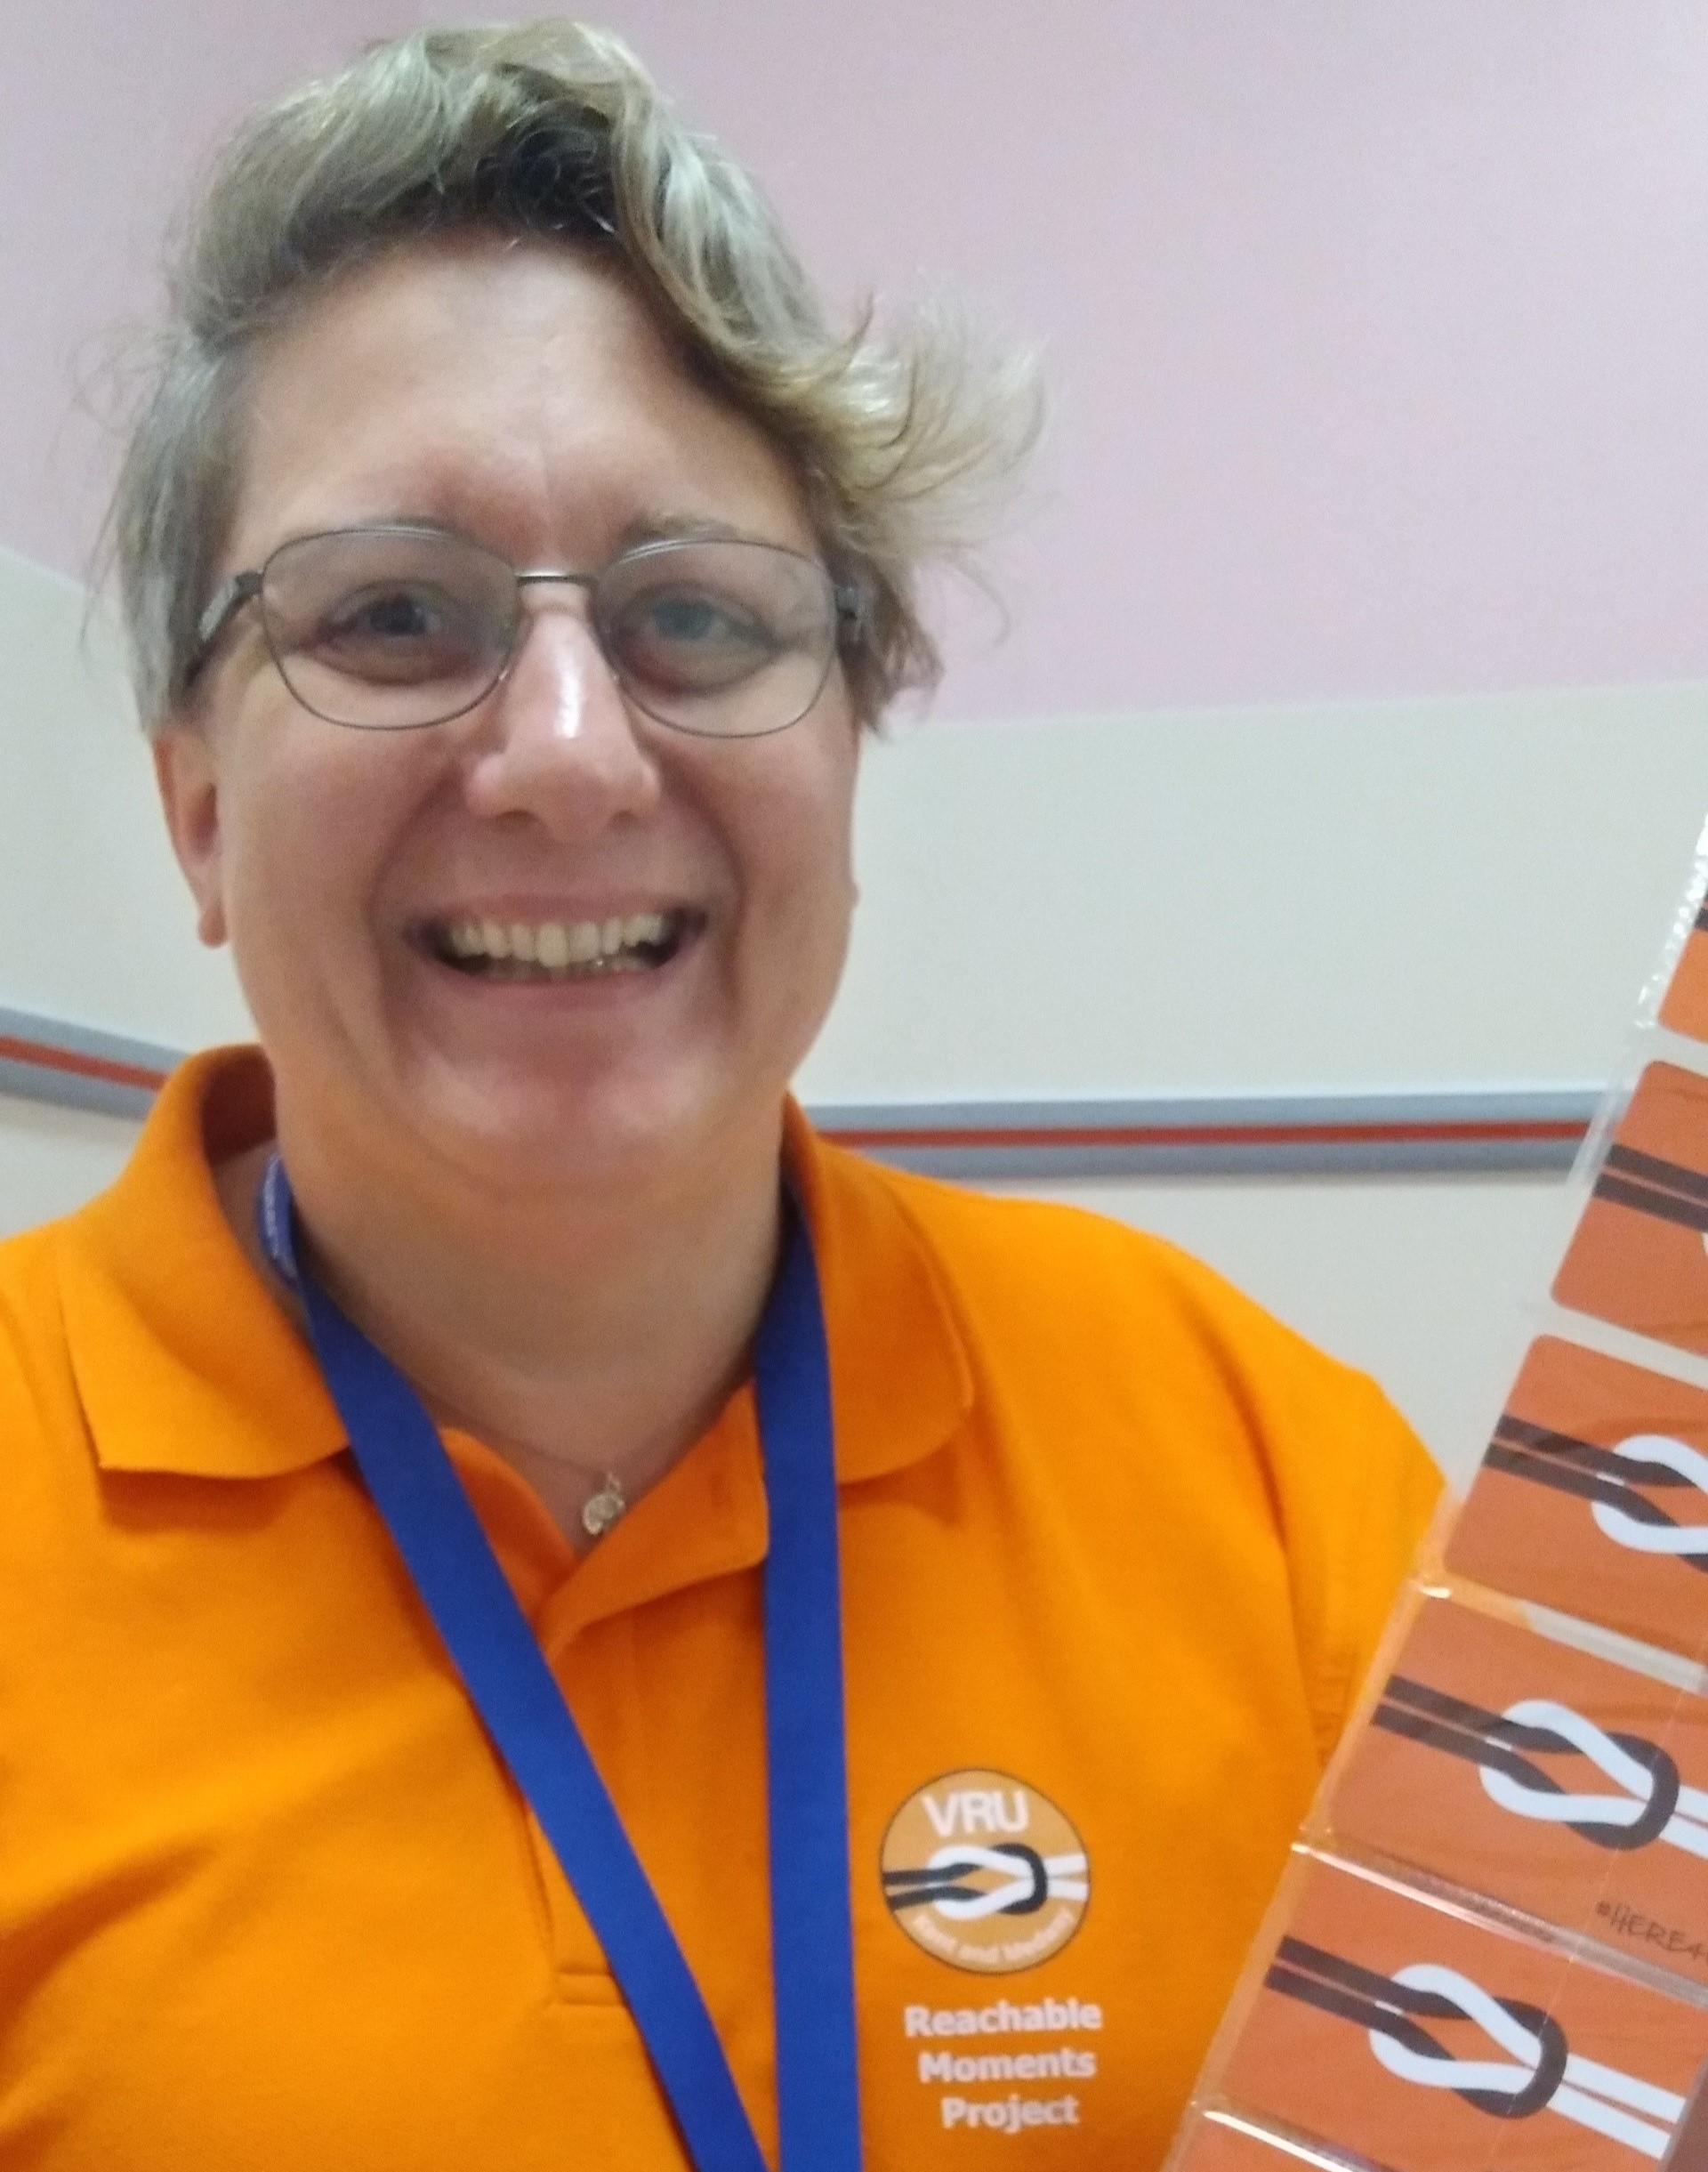 Picture showing Stacey Gibson who is a Reachable Moments worker at Ashford Hospital. Stacey is wearing a VRU branded t-shirt in orange and is facing the camera.